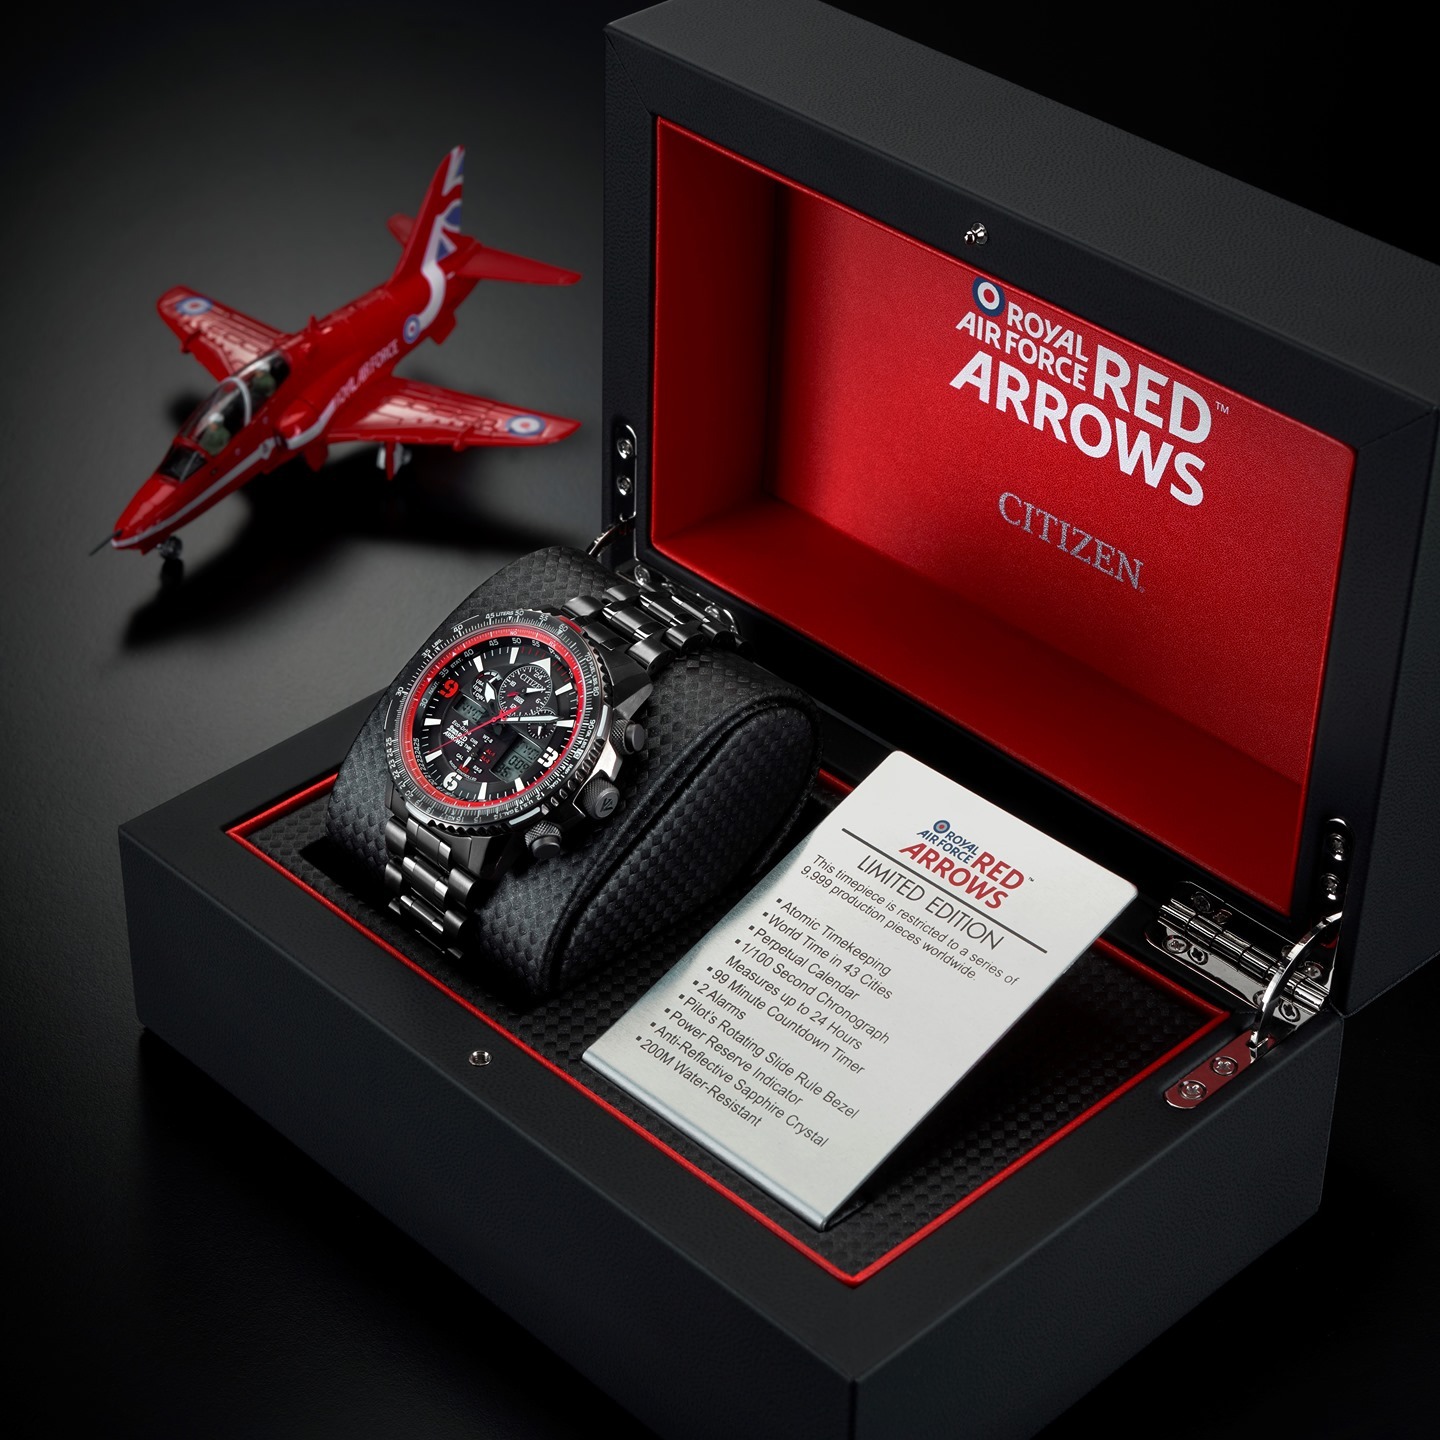 House of Watches on Twitter: "A partnership of professionalism and precision - The Limited Edition @citizen_watch Red Arrows Skyhawk A-T. This light-powered Limited Edition is packed full of style and function: #